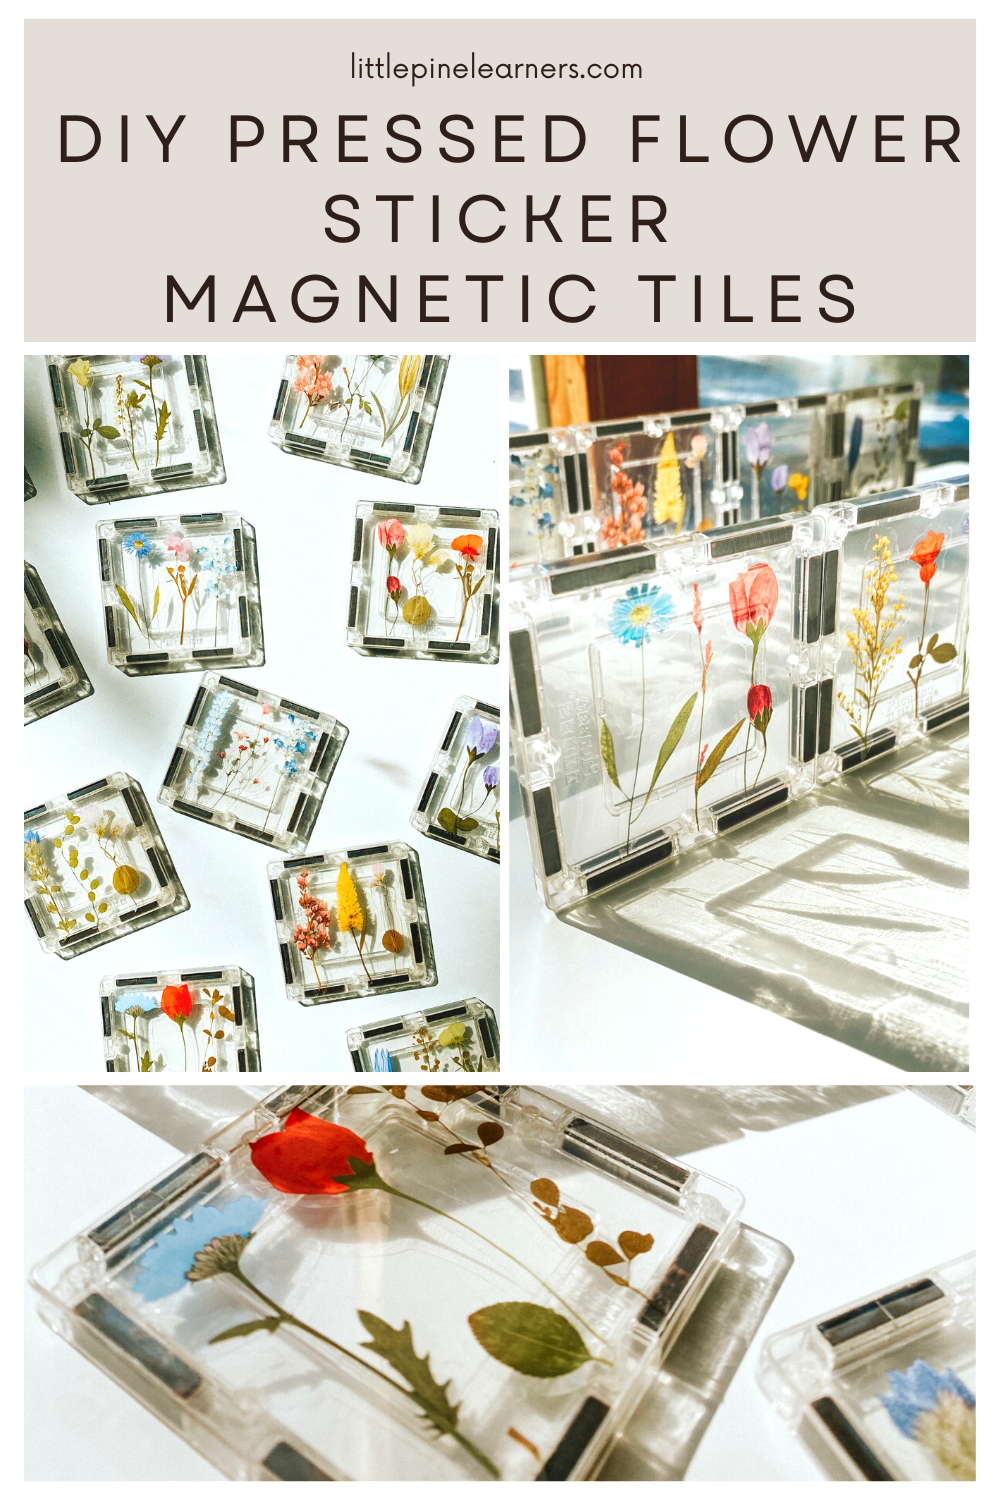 DIY Magnetic Tiles with Pressed Flower Stickers